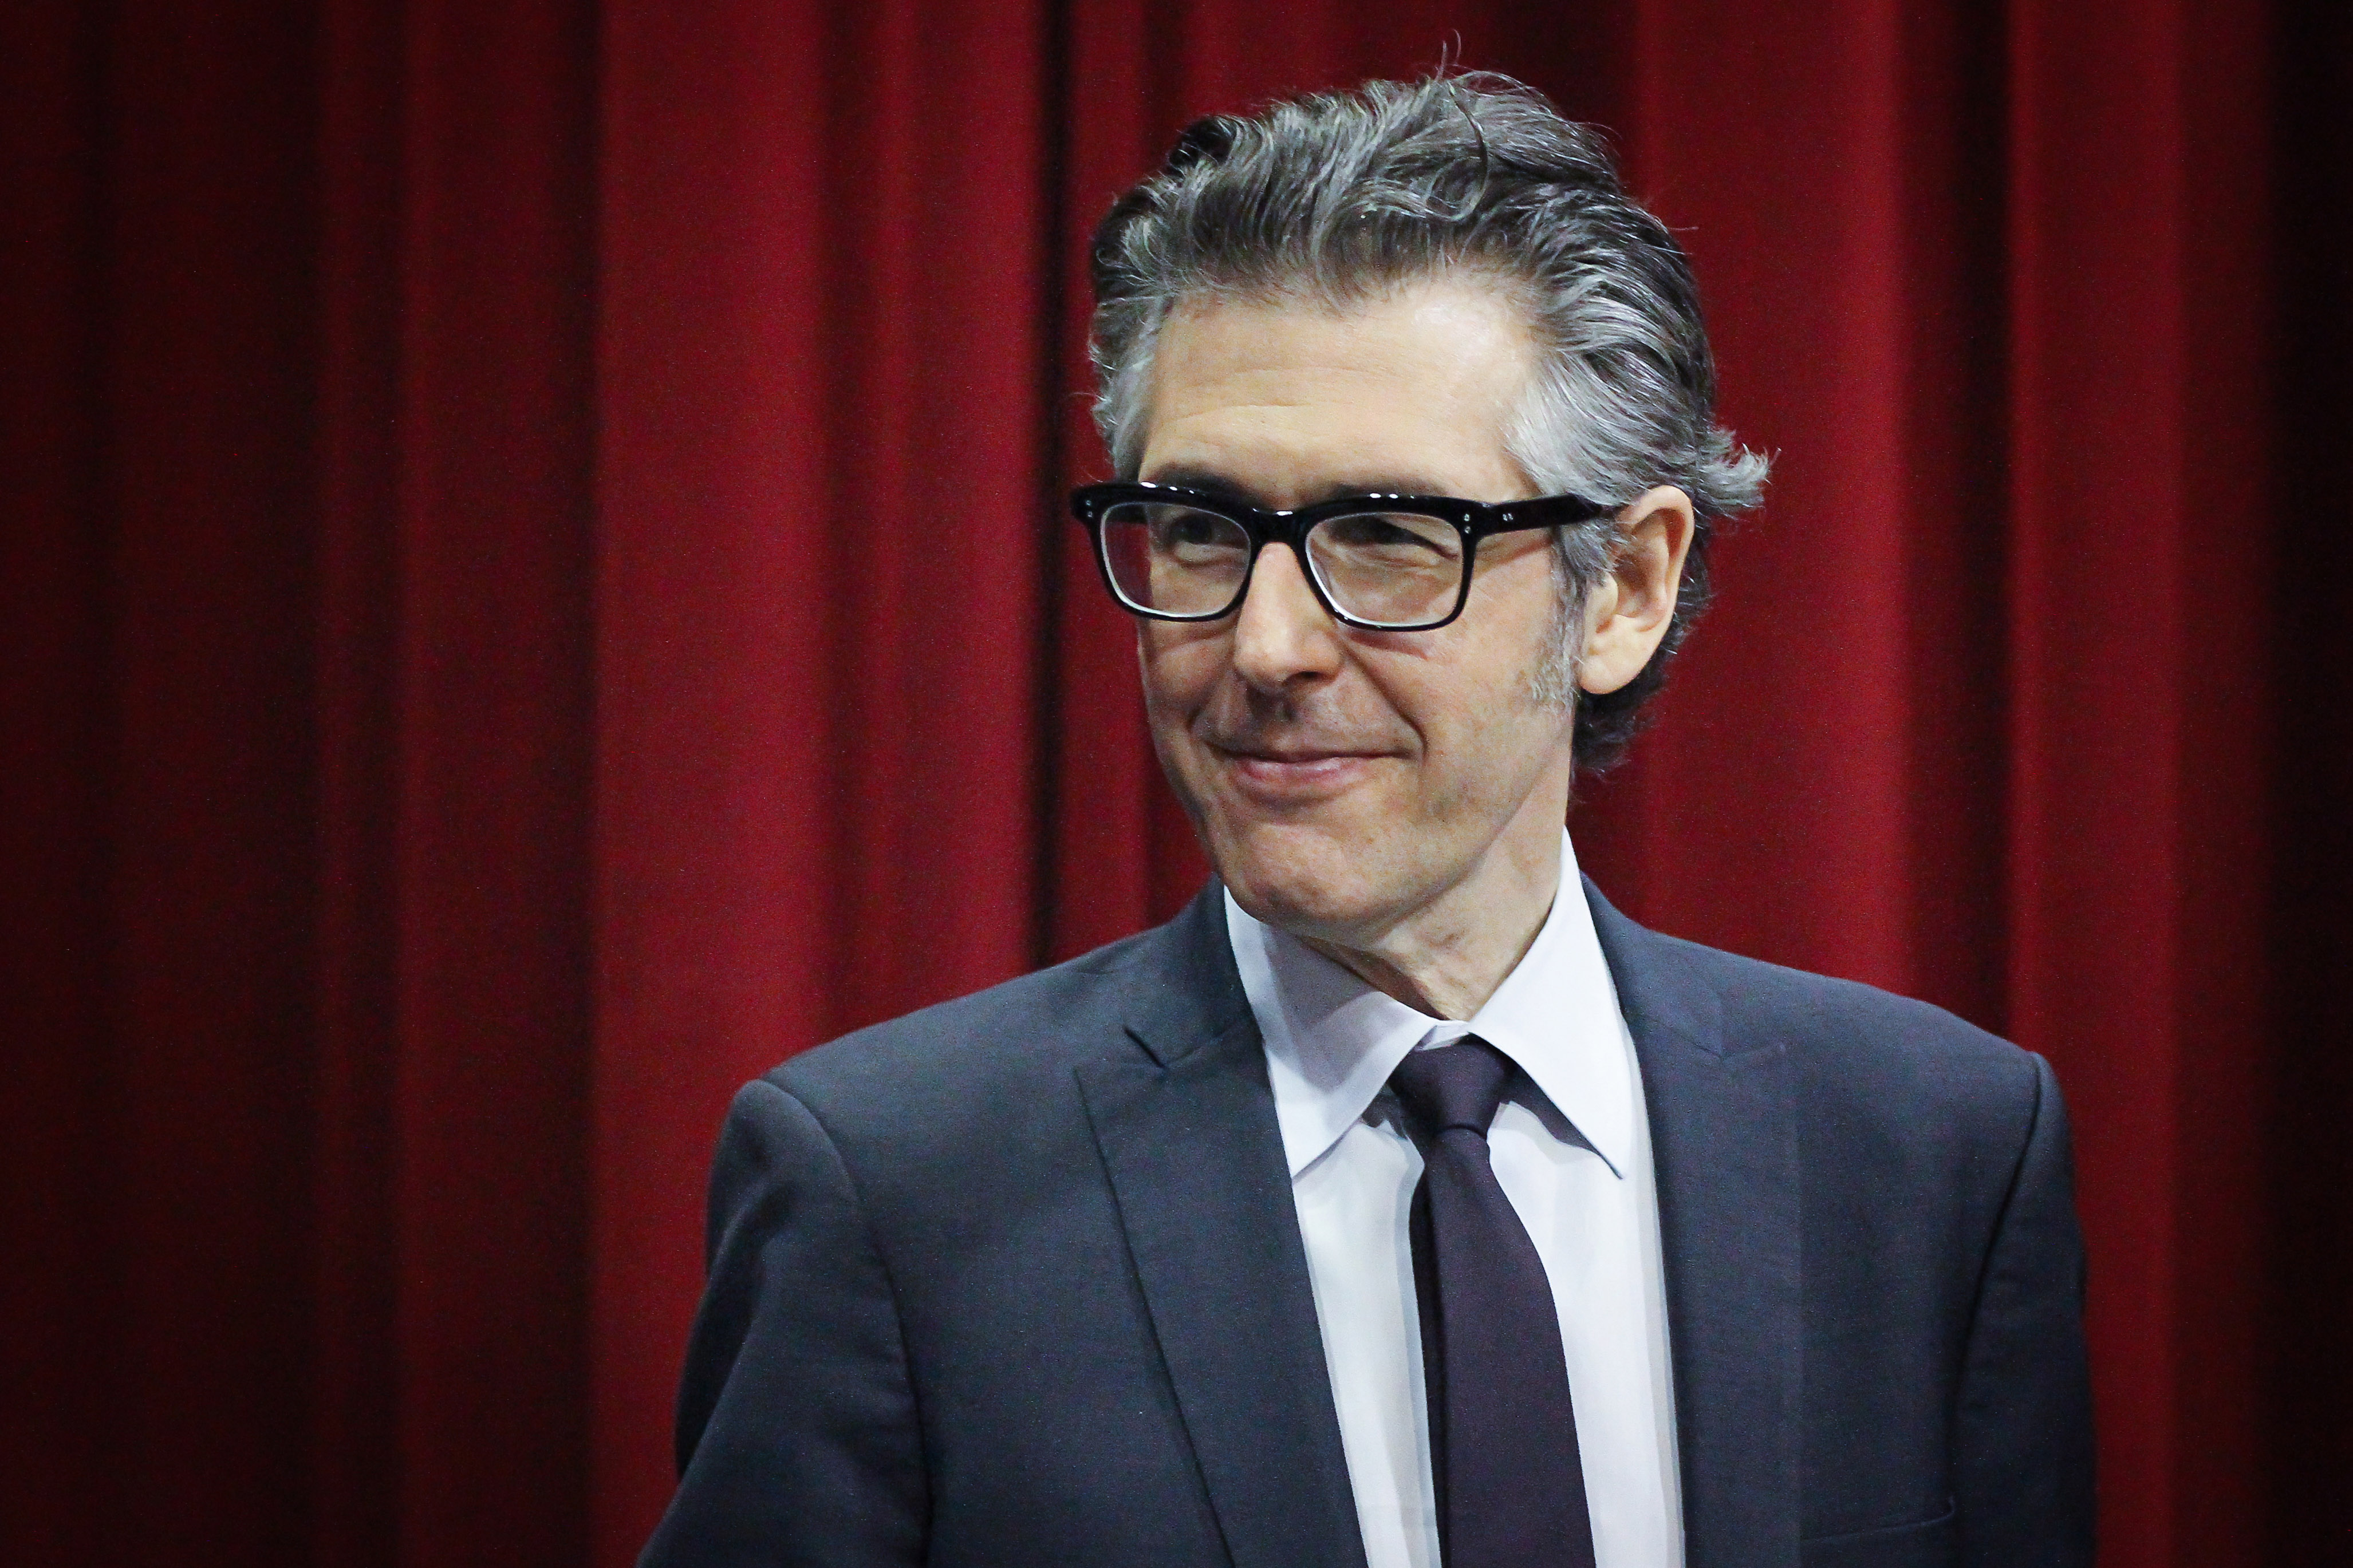 Seven Things I’ve Learned: An Evening with Ira Glass